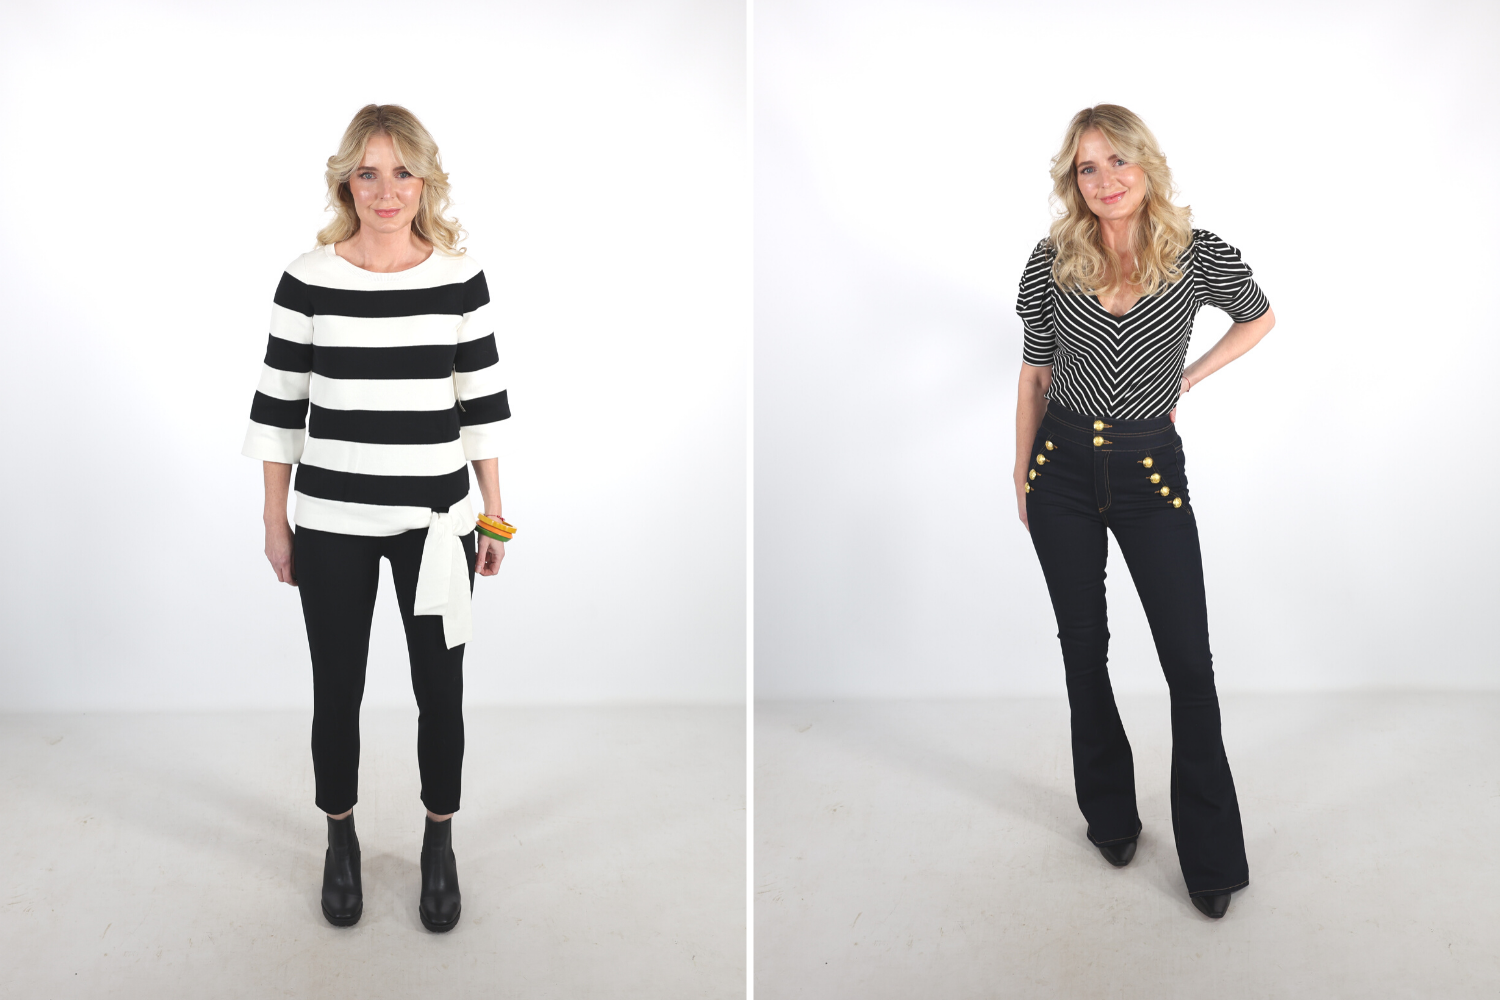 How To Look Younger, Erin Busbee of Busbee in a before and after wearing a big striped top, black jeans and black boots on the left and a Frame striped tee, Veronica beard flared jeans, and black booties on the right